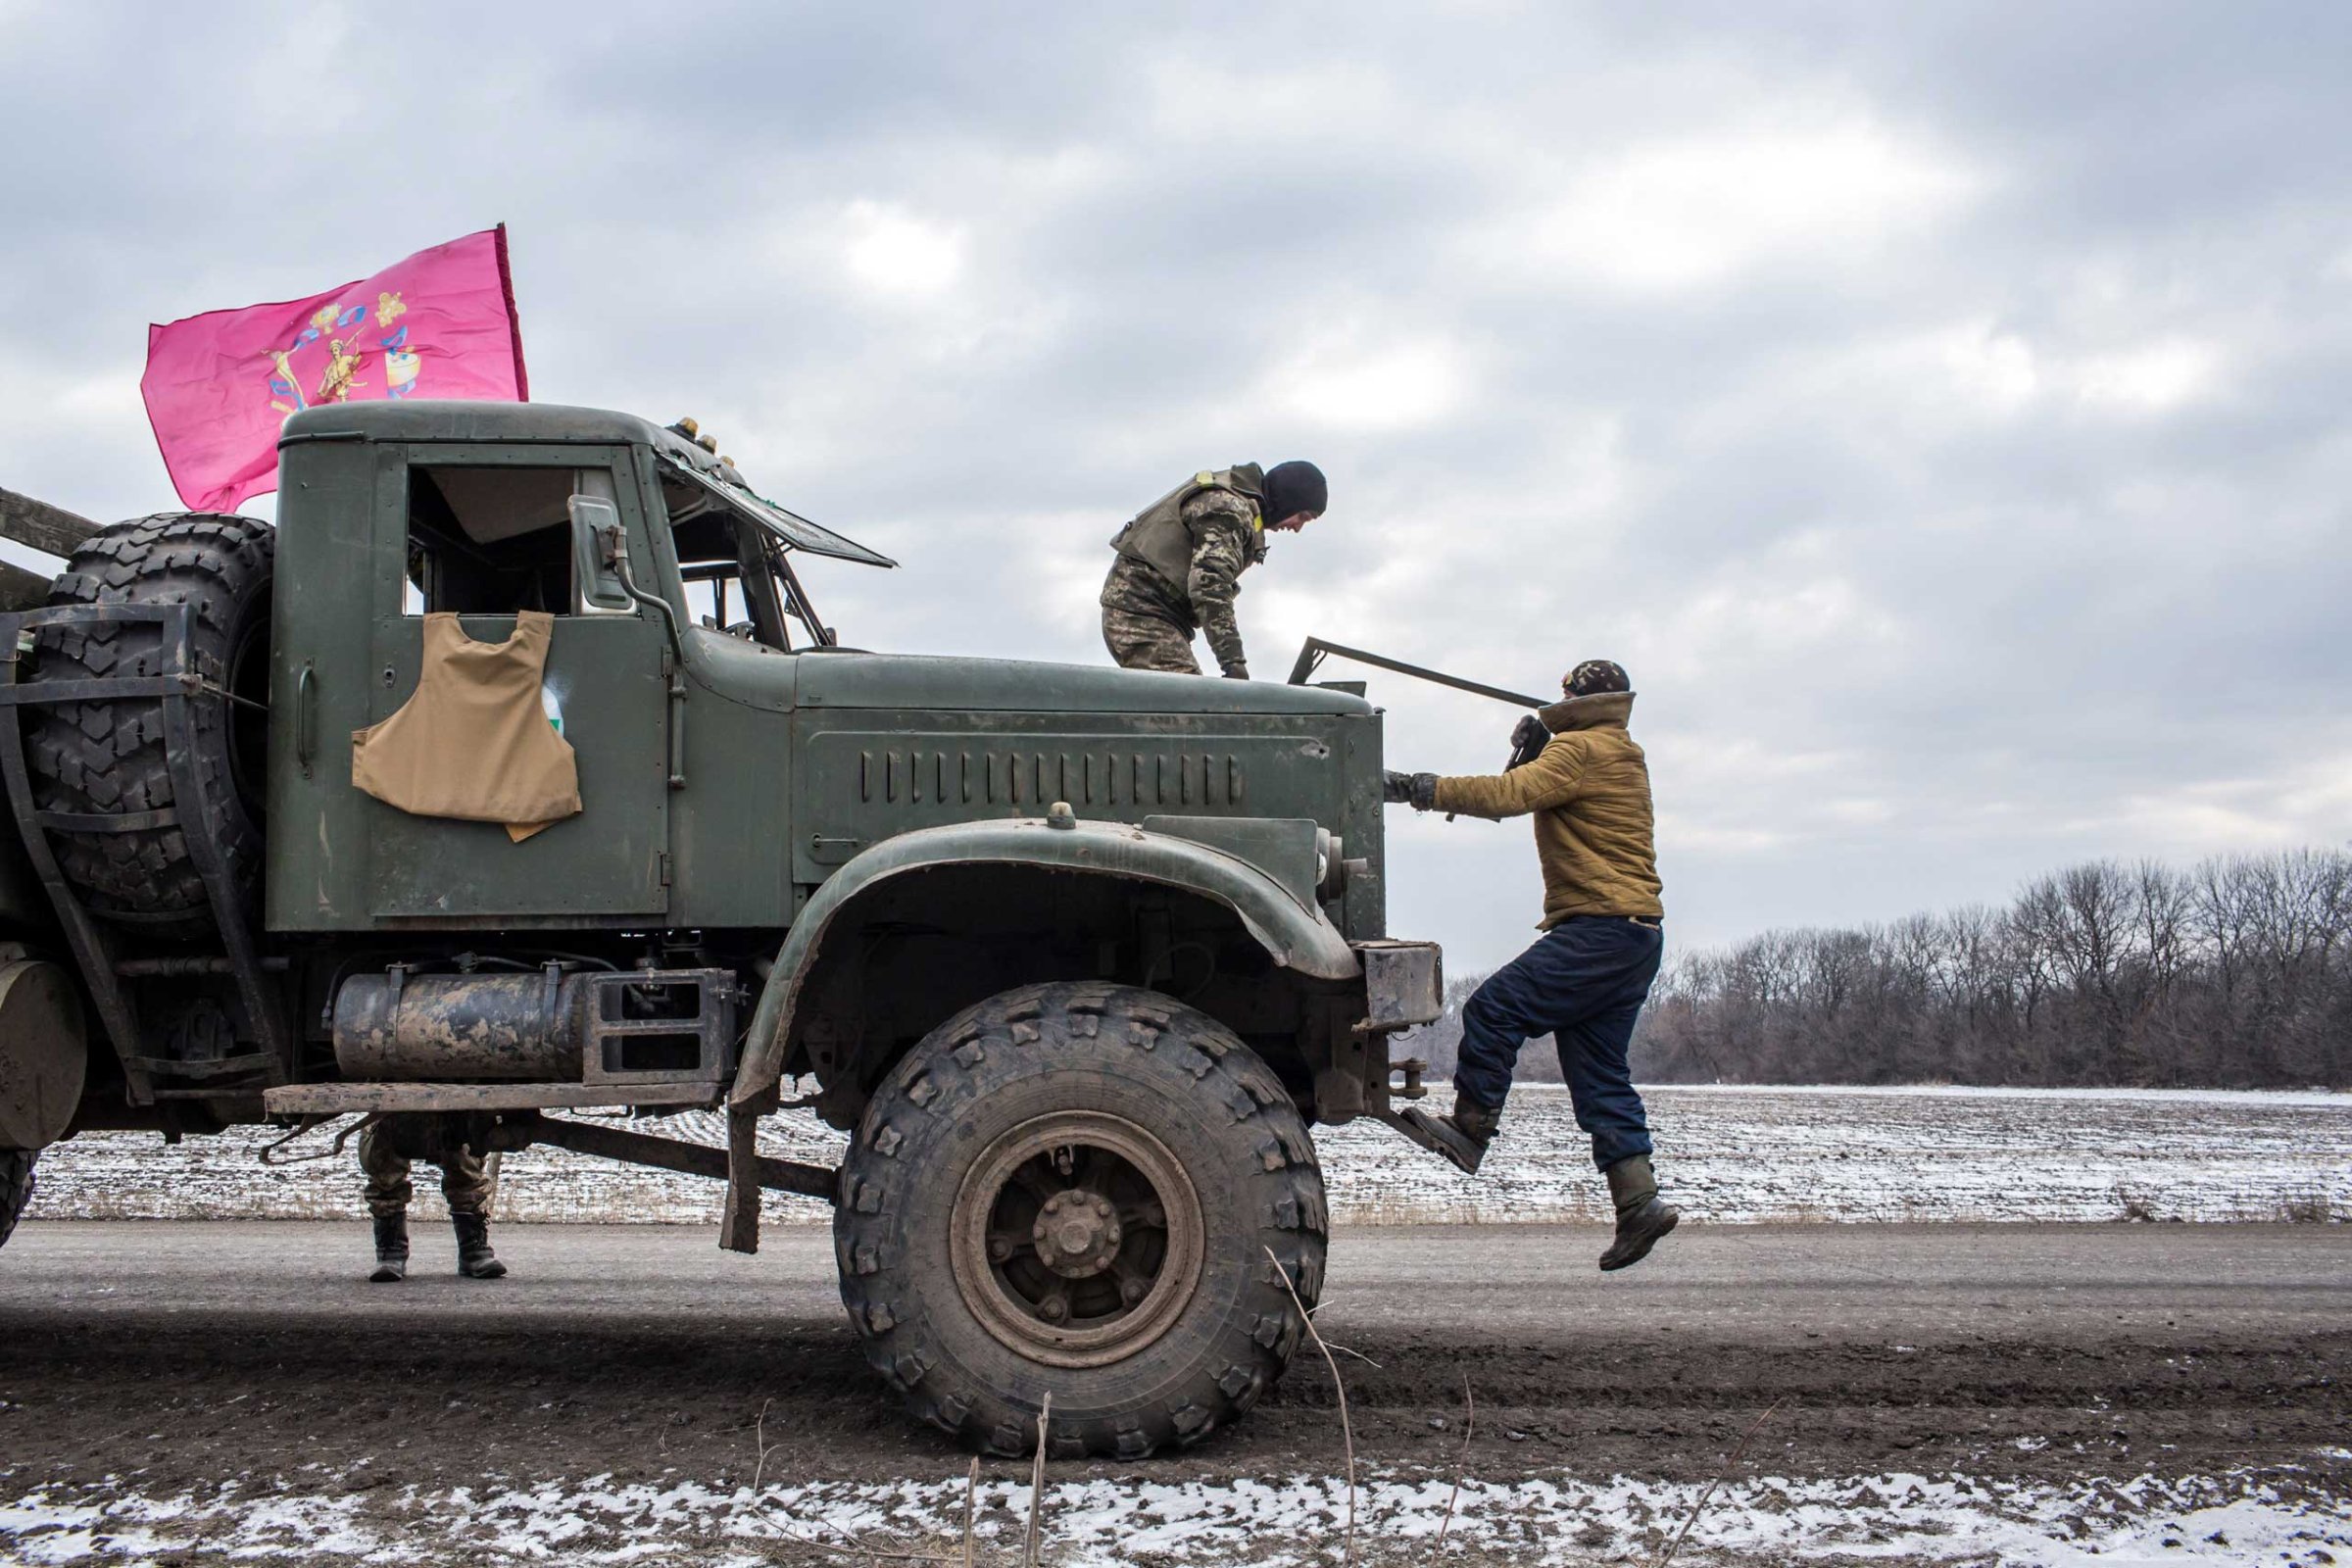 Ukrainian soldiers from a unit based in Zaporizhia repair the bullet-shattered windshield of a truck after taking fire during their withdrawal from Debaltseve the previous day on Feb. 19, 2015 in Artemivsk.